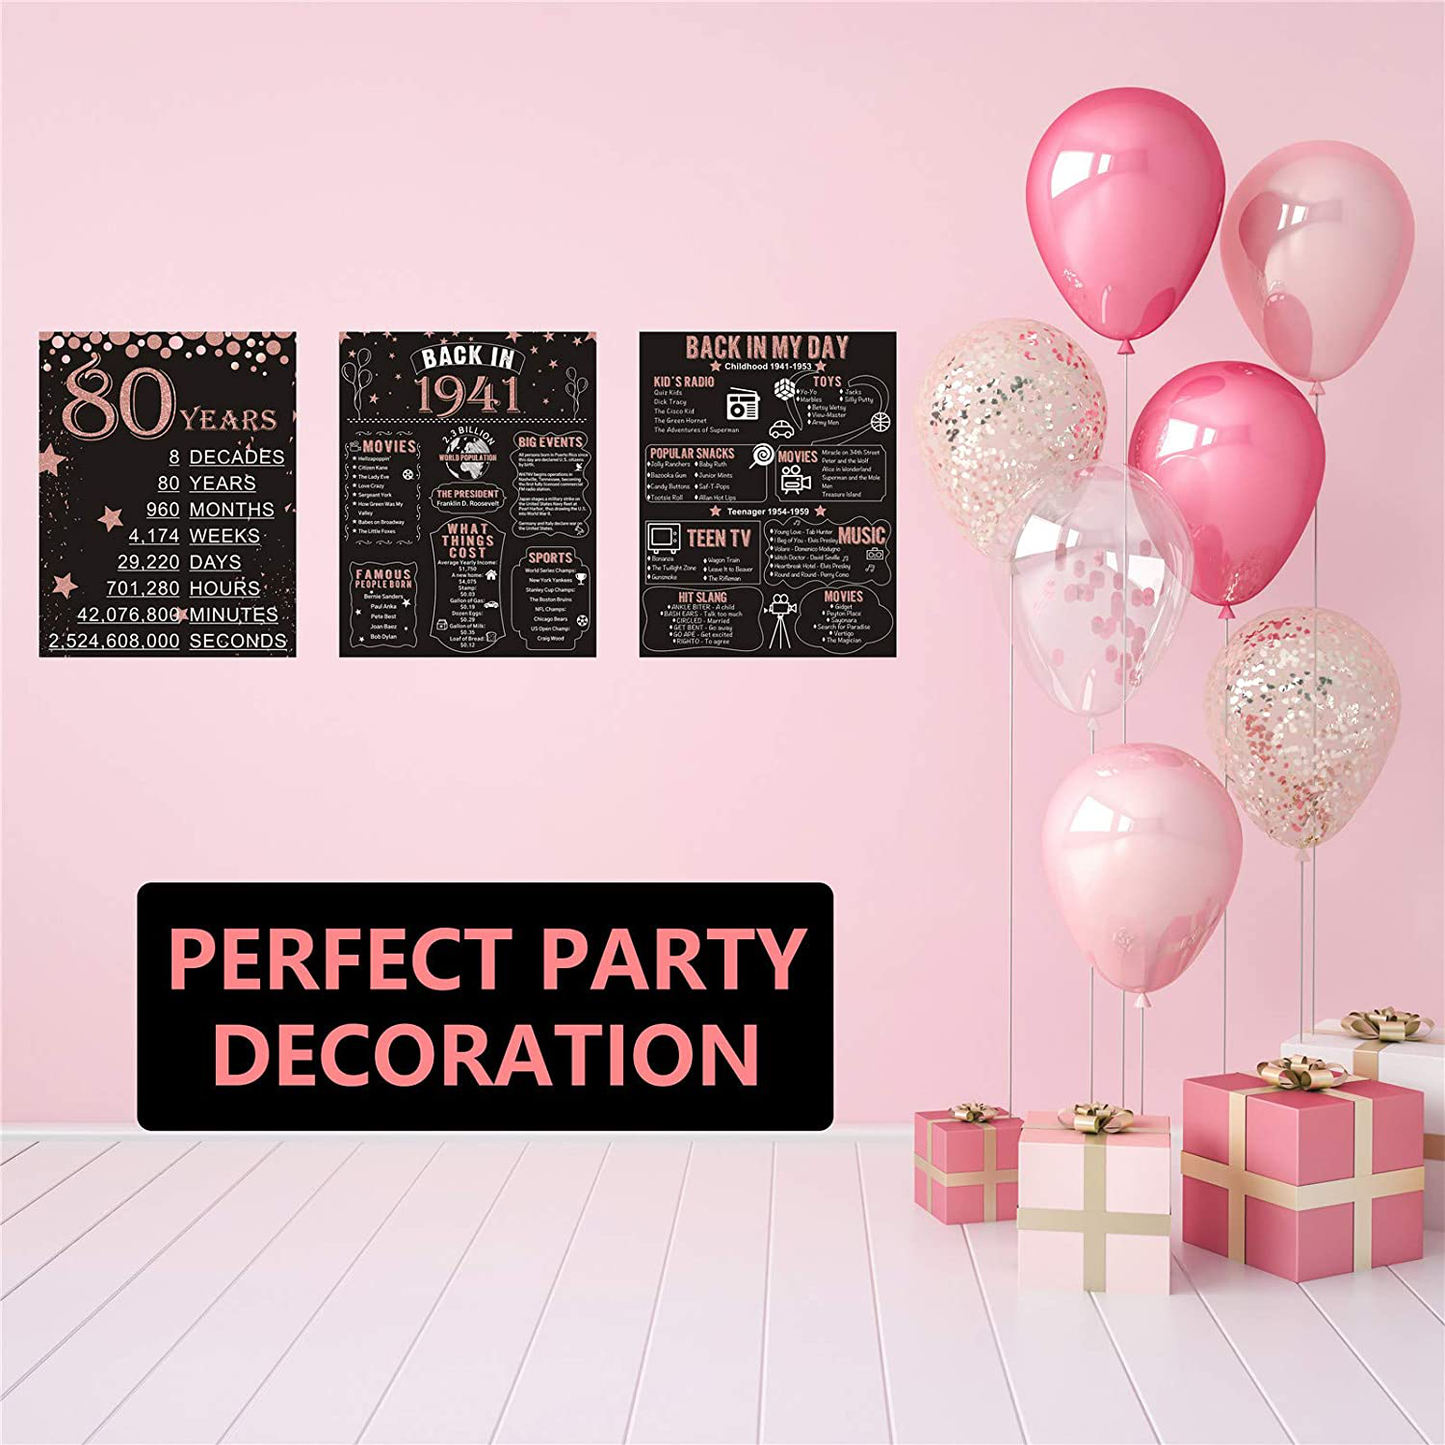 Homanga 70th Birthday Decorations for Women or Men, Rose Gold 3 Pieces 11”x 14” Back In 1951 Poster, 70 Years Party Wedding Anniversary Decoration Supplies, 70th Gifts for Women Her